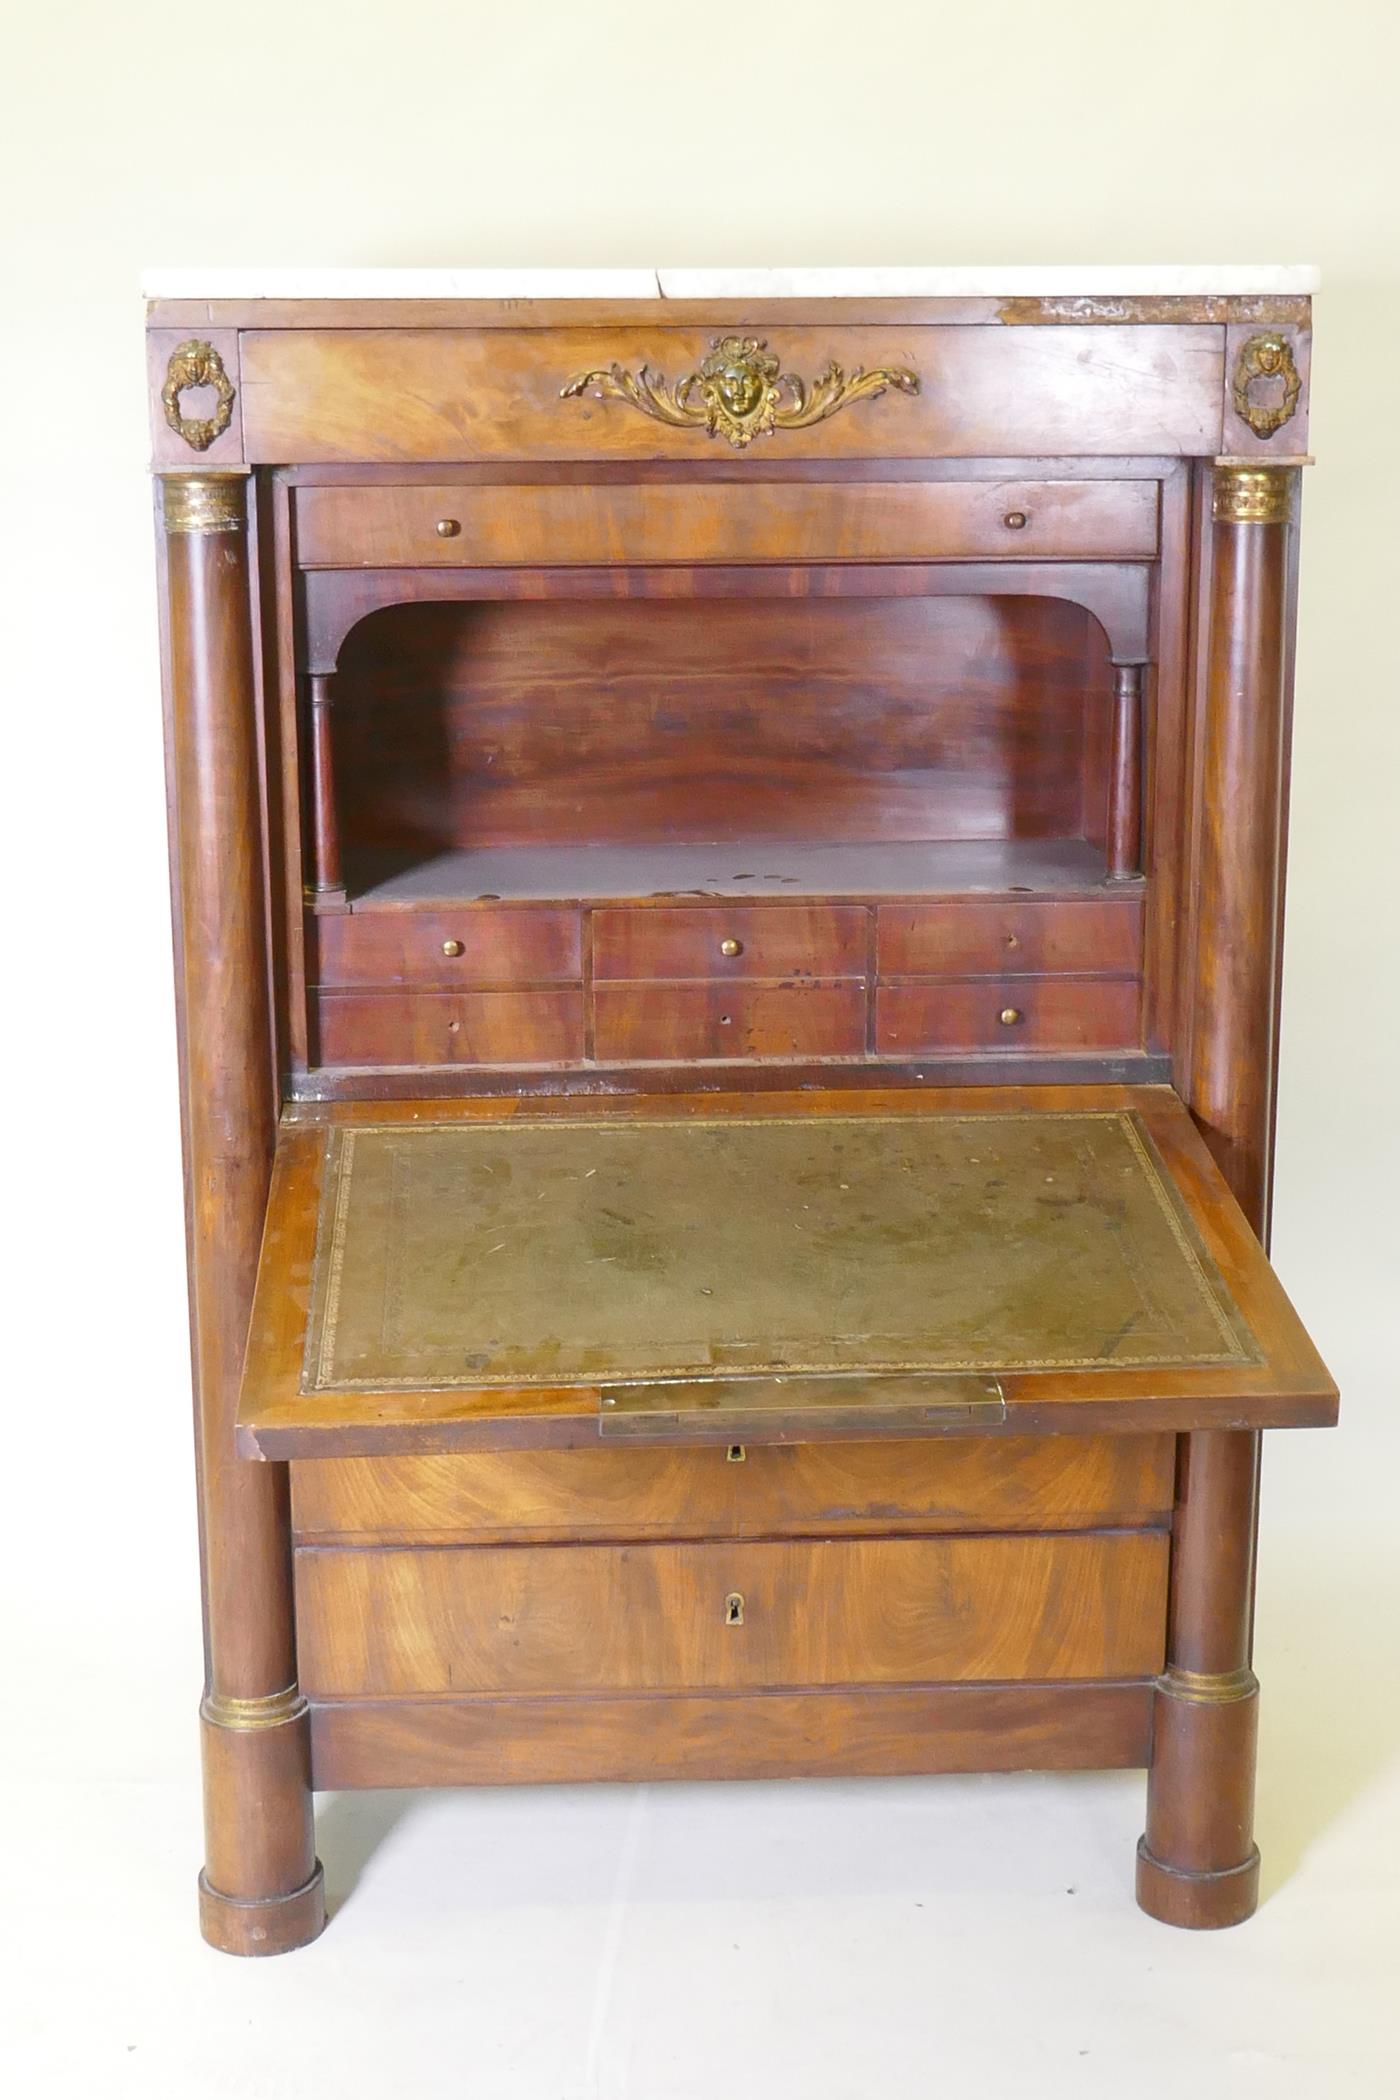 A C19th continental figured mahogany secretaire a abattant with ormolu mounts and marble top over - Image 5 of 6